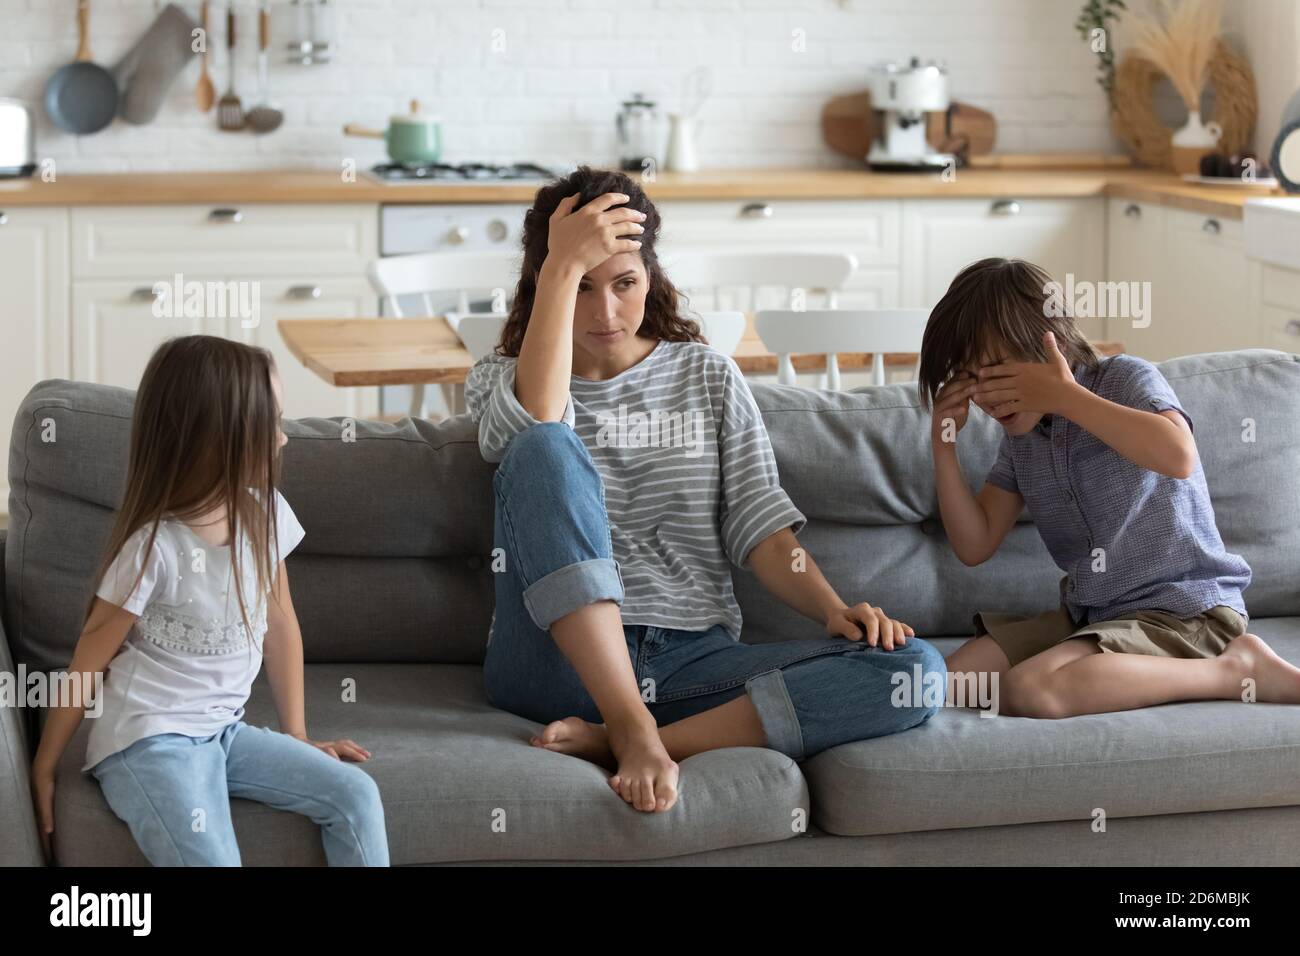 Tired exhausted mother having problem with naughty noisy kids Stock Photo